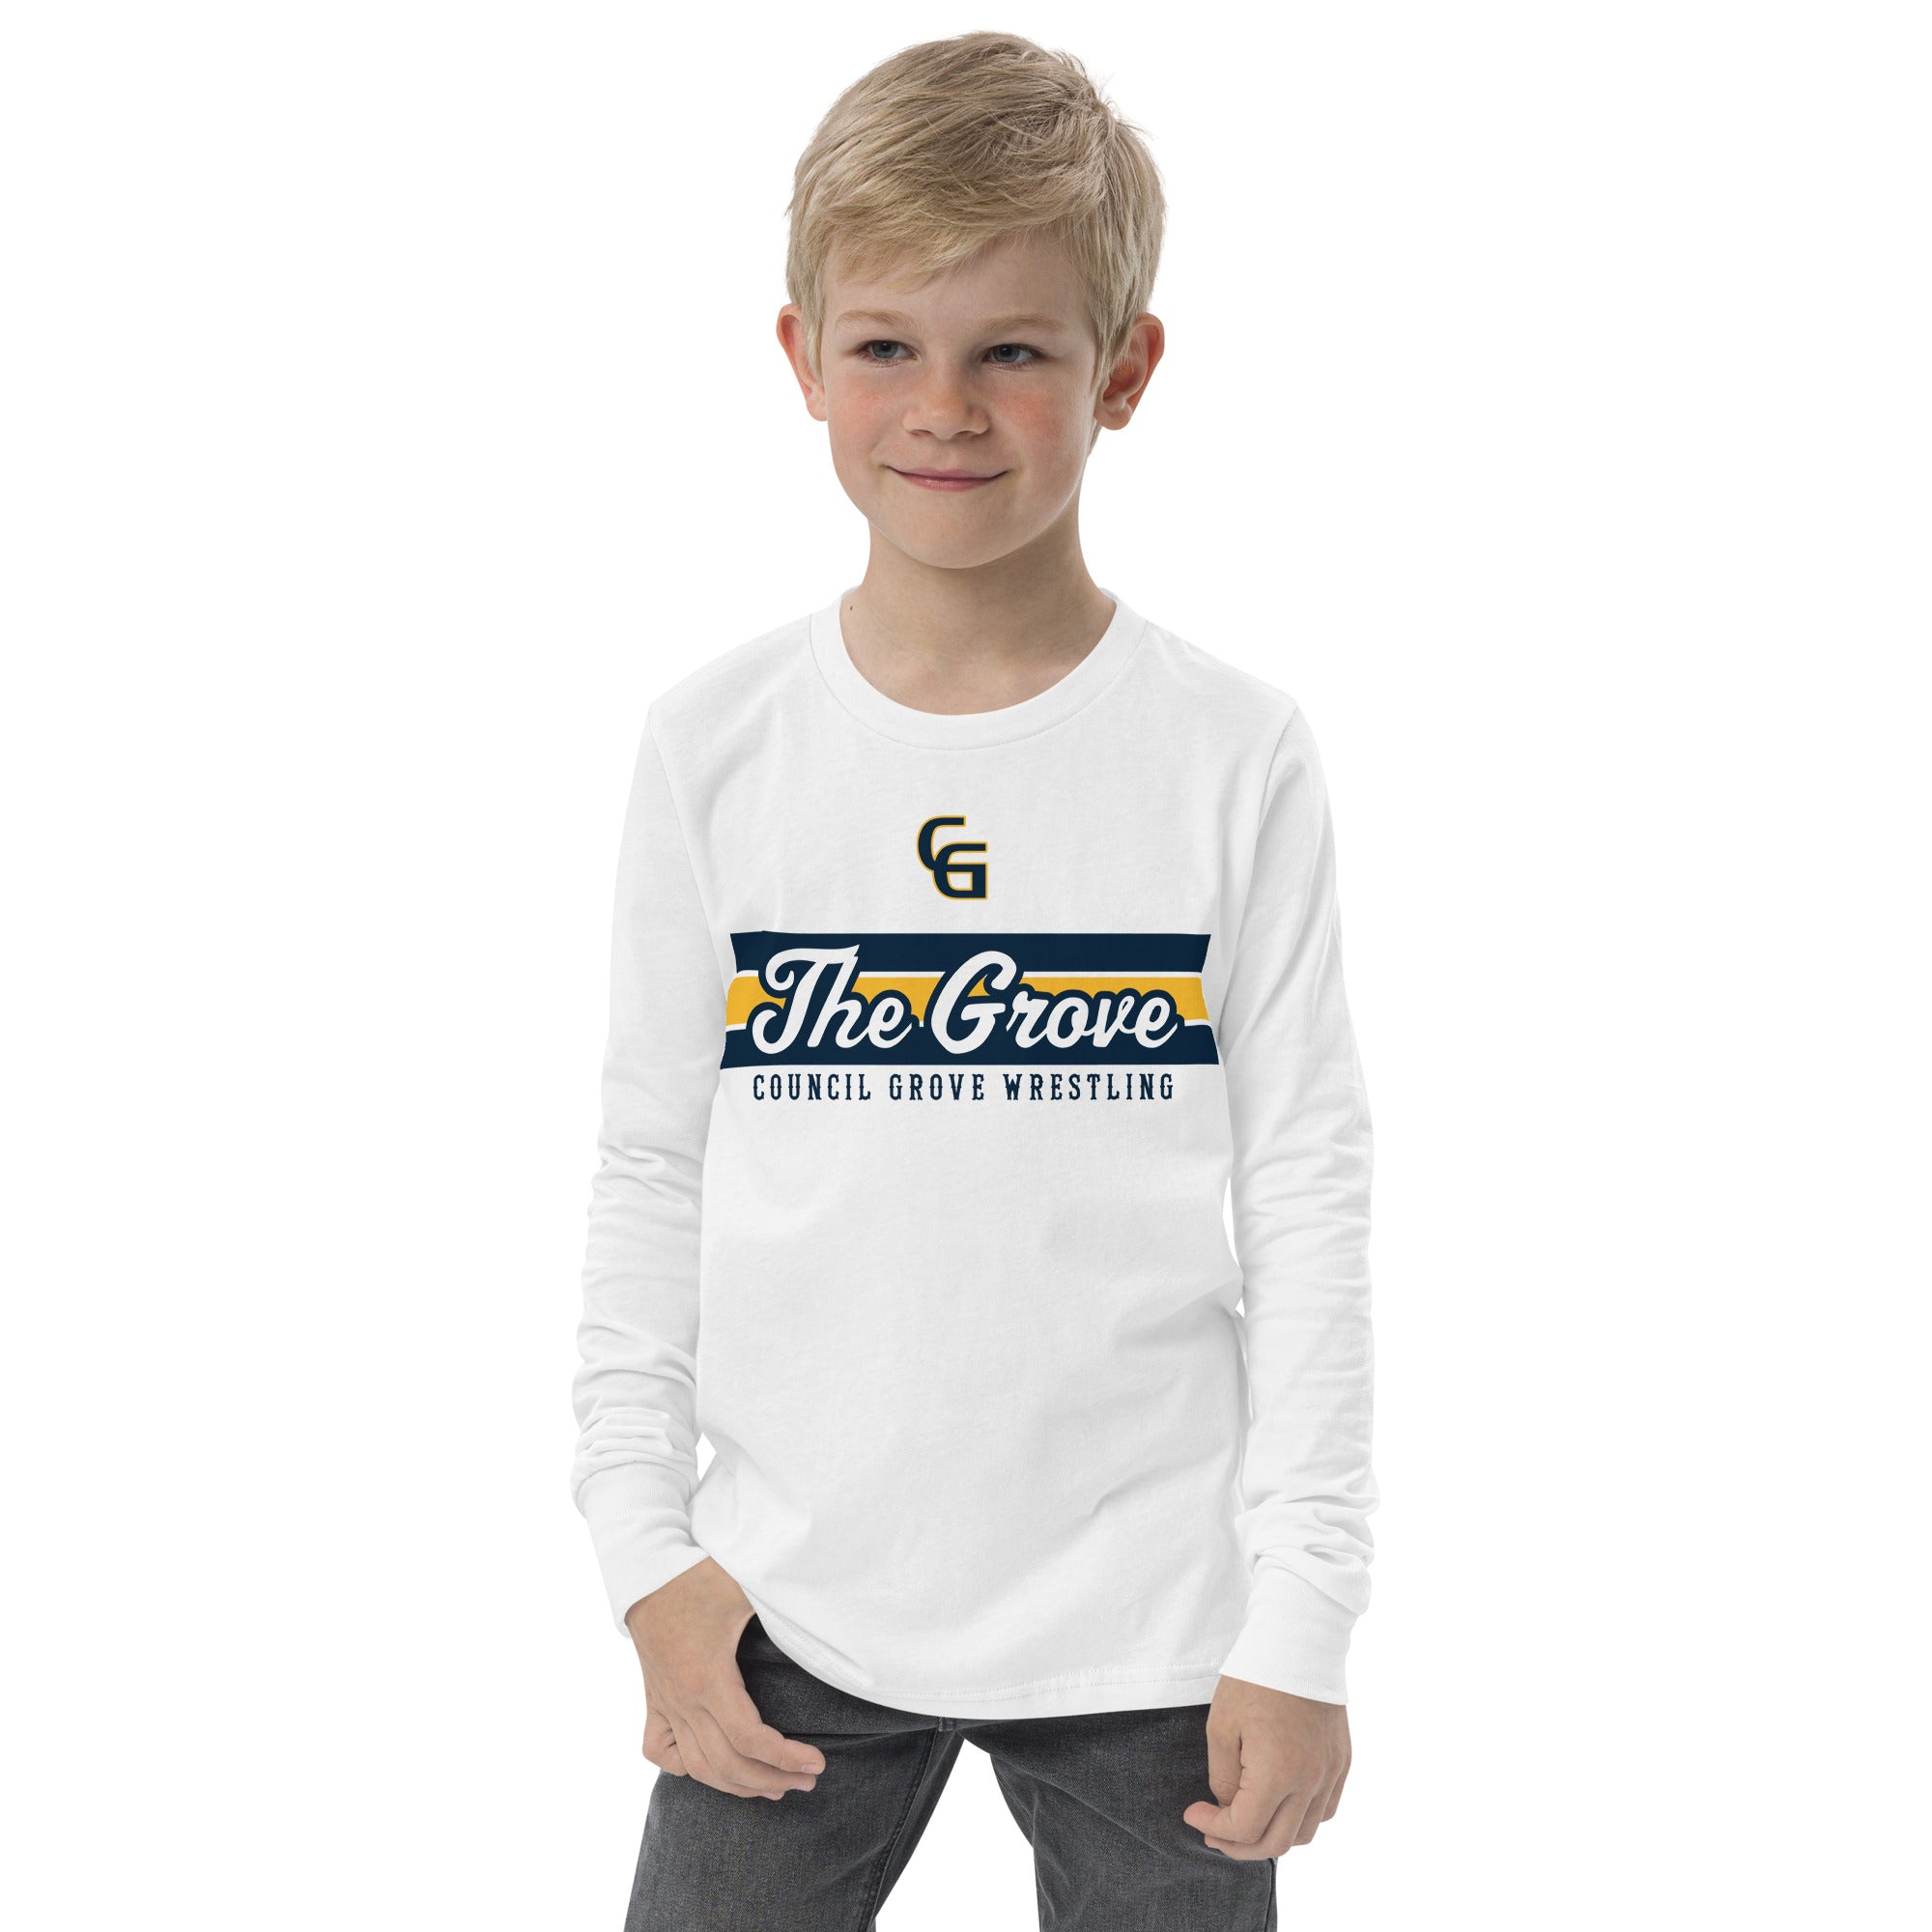 Council Grove Wrestling Youth long sleeve tee